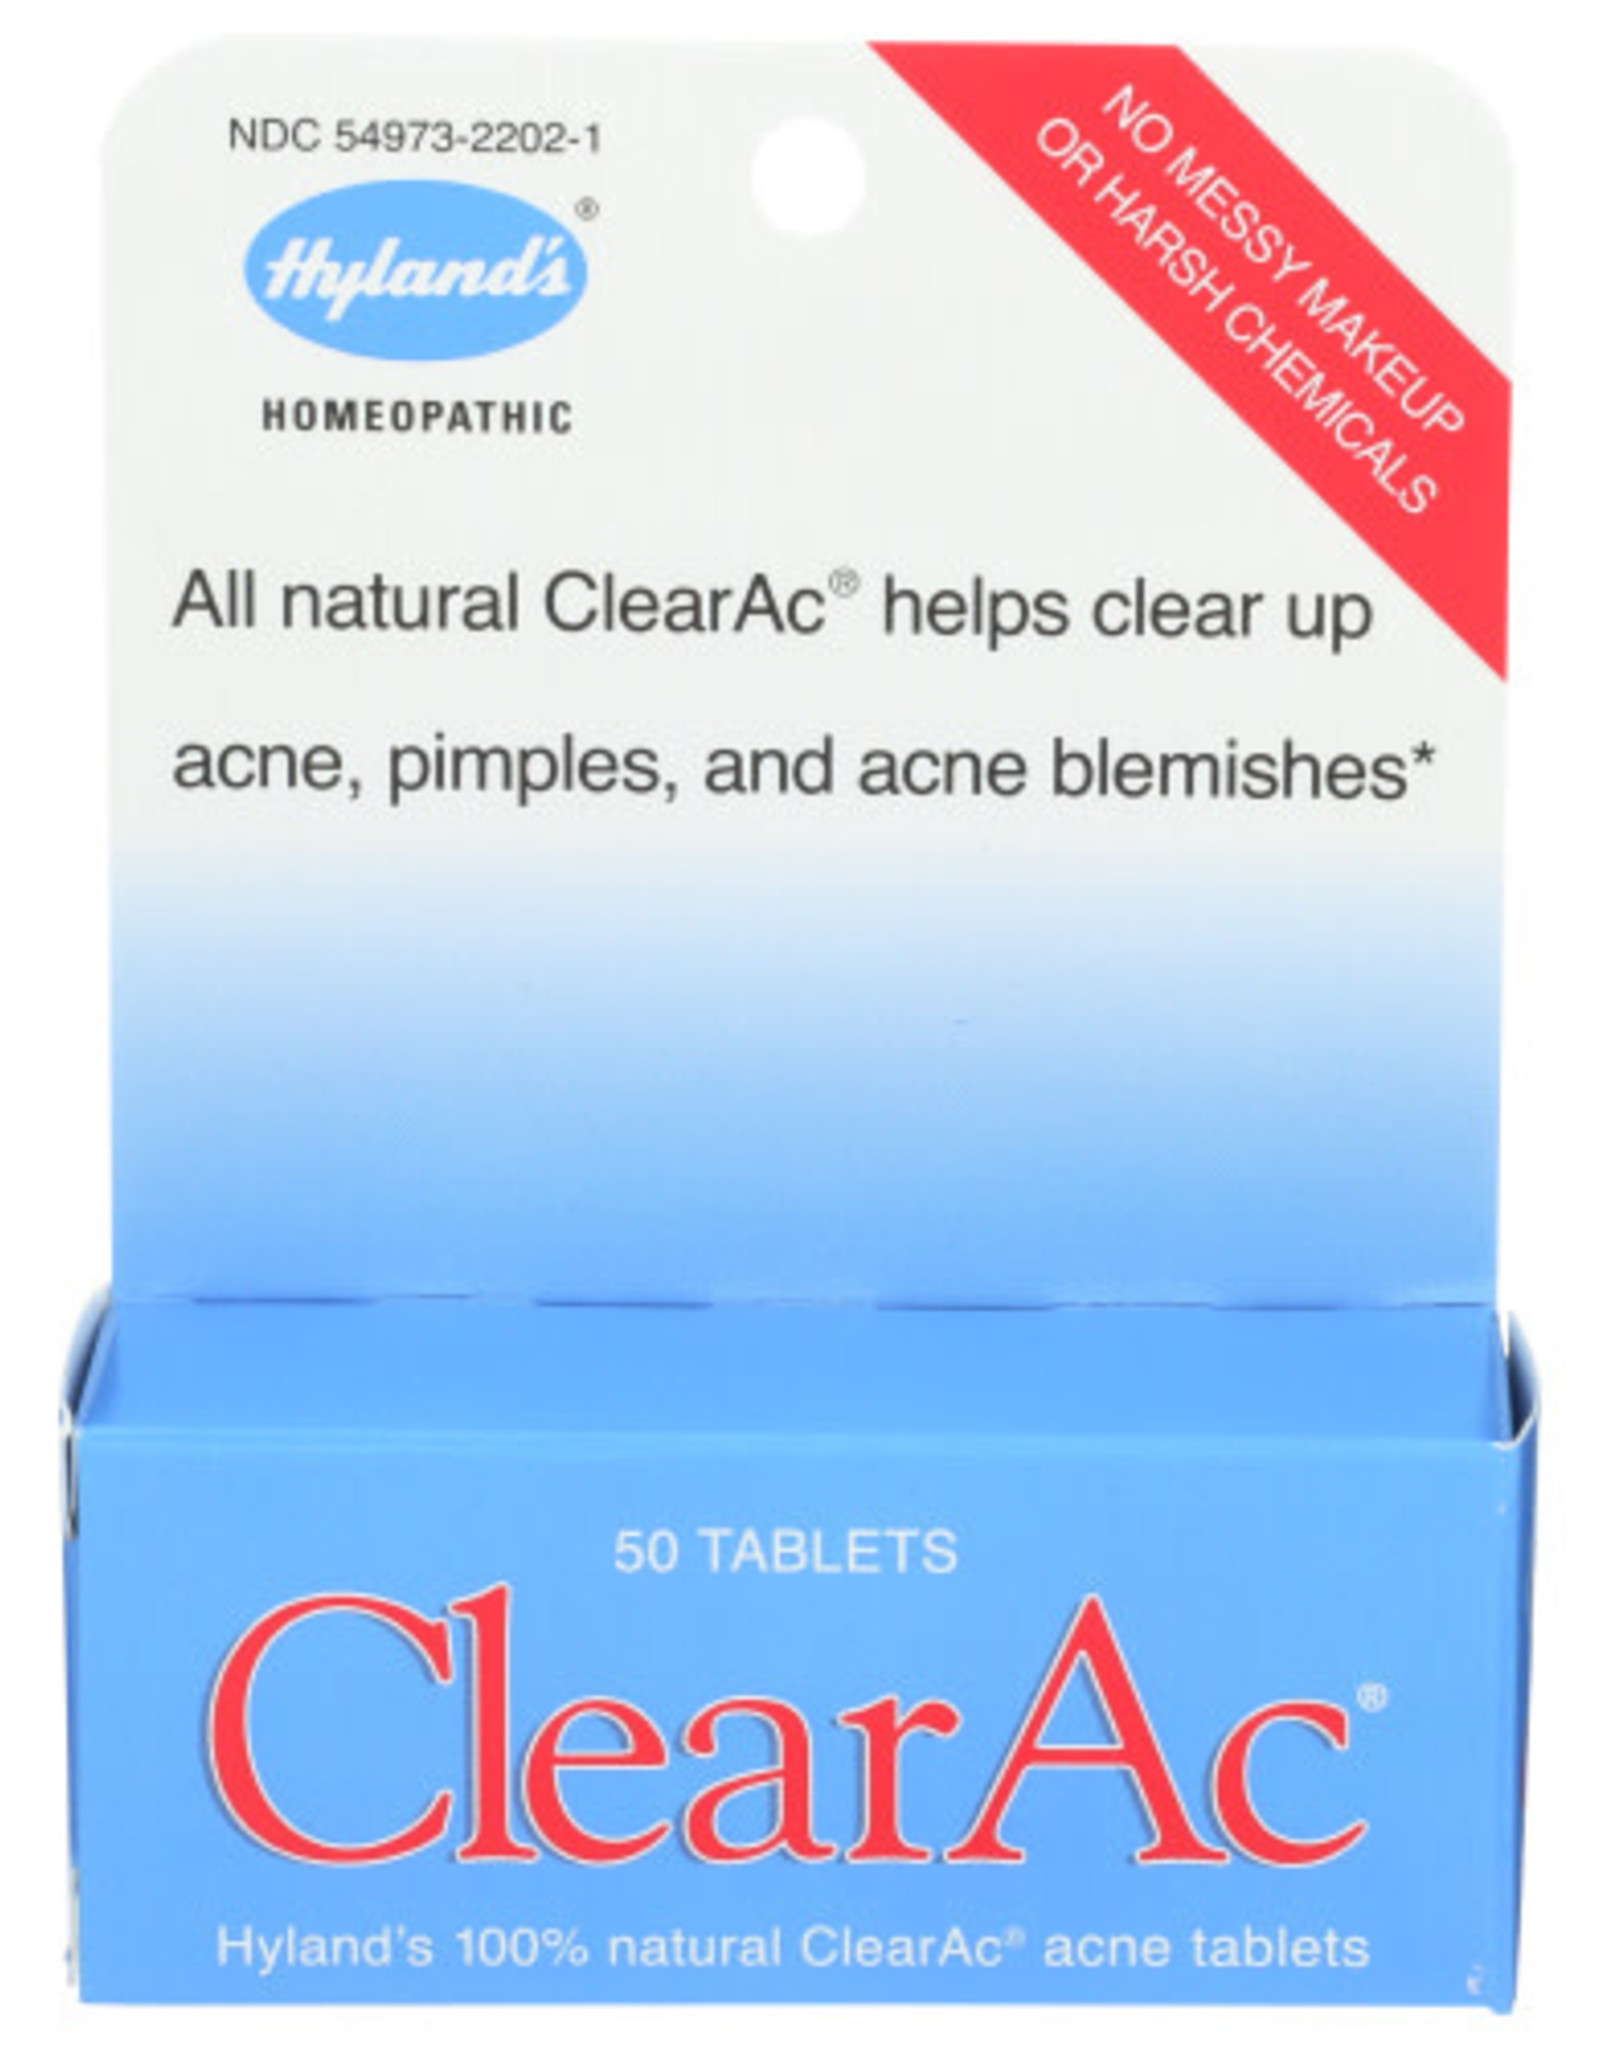 HYLAND'S® HYLAND'S CLEARAC ACNE TABLETS, 50 TABLETS